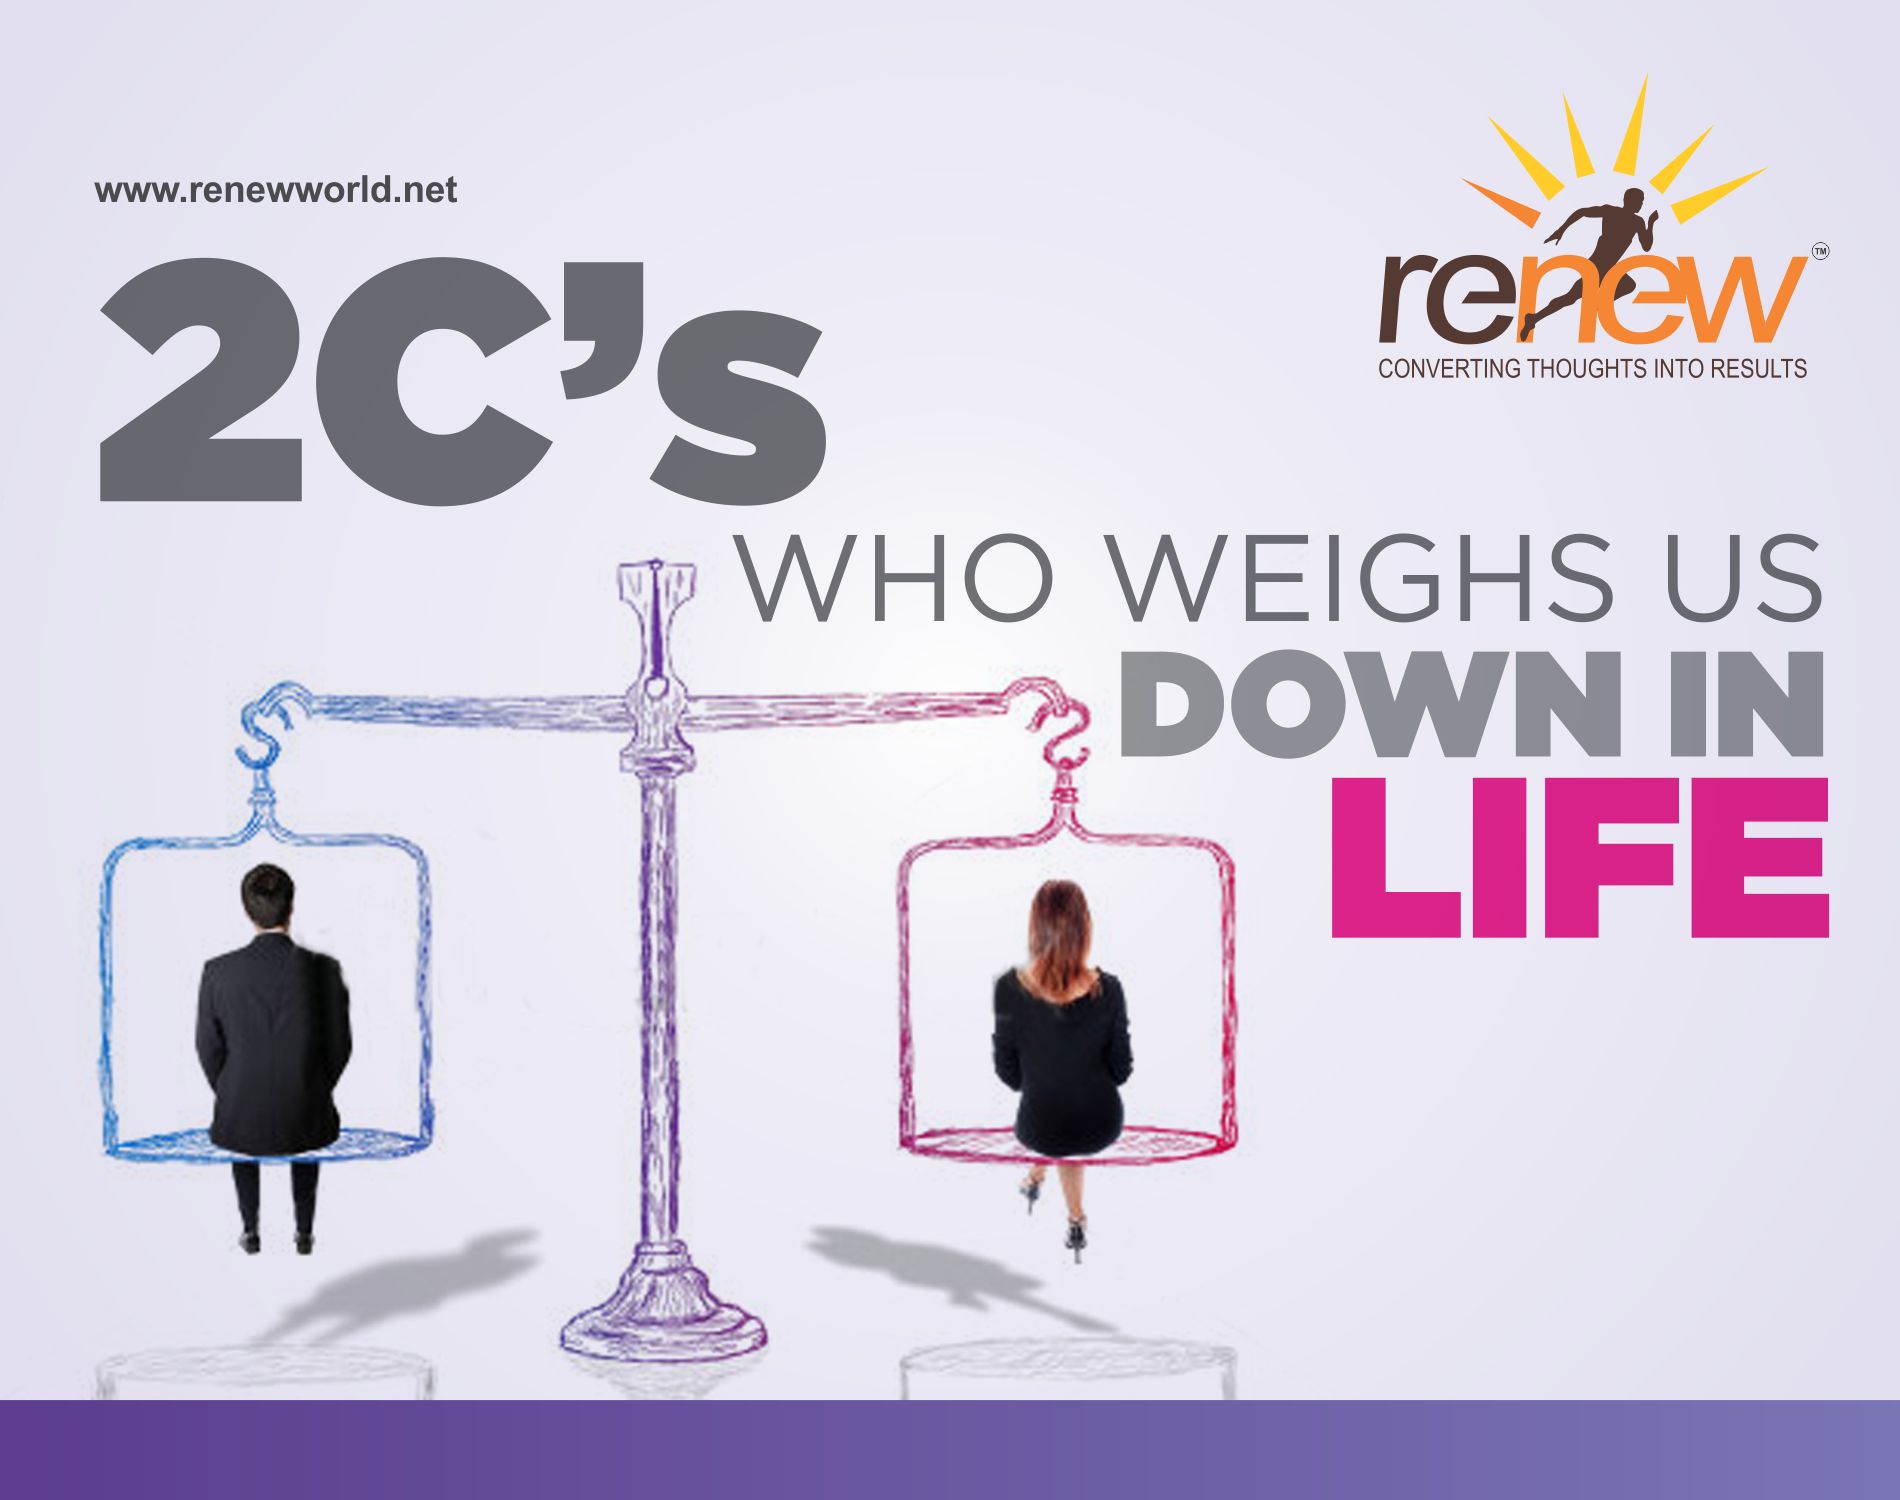 2 C’s, who weighs us down in life